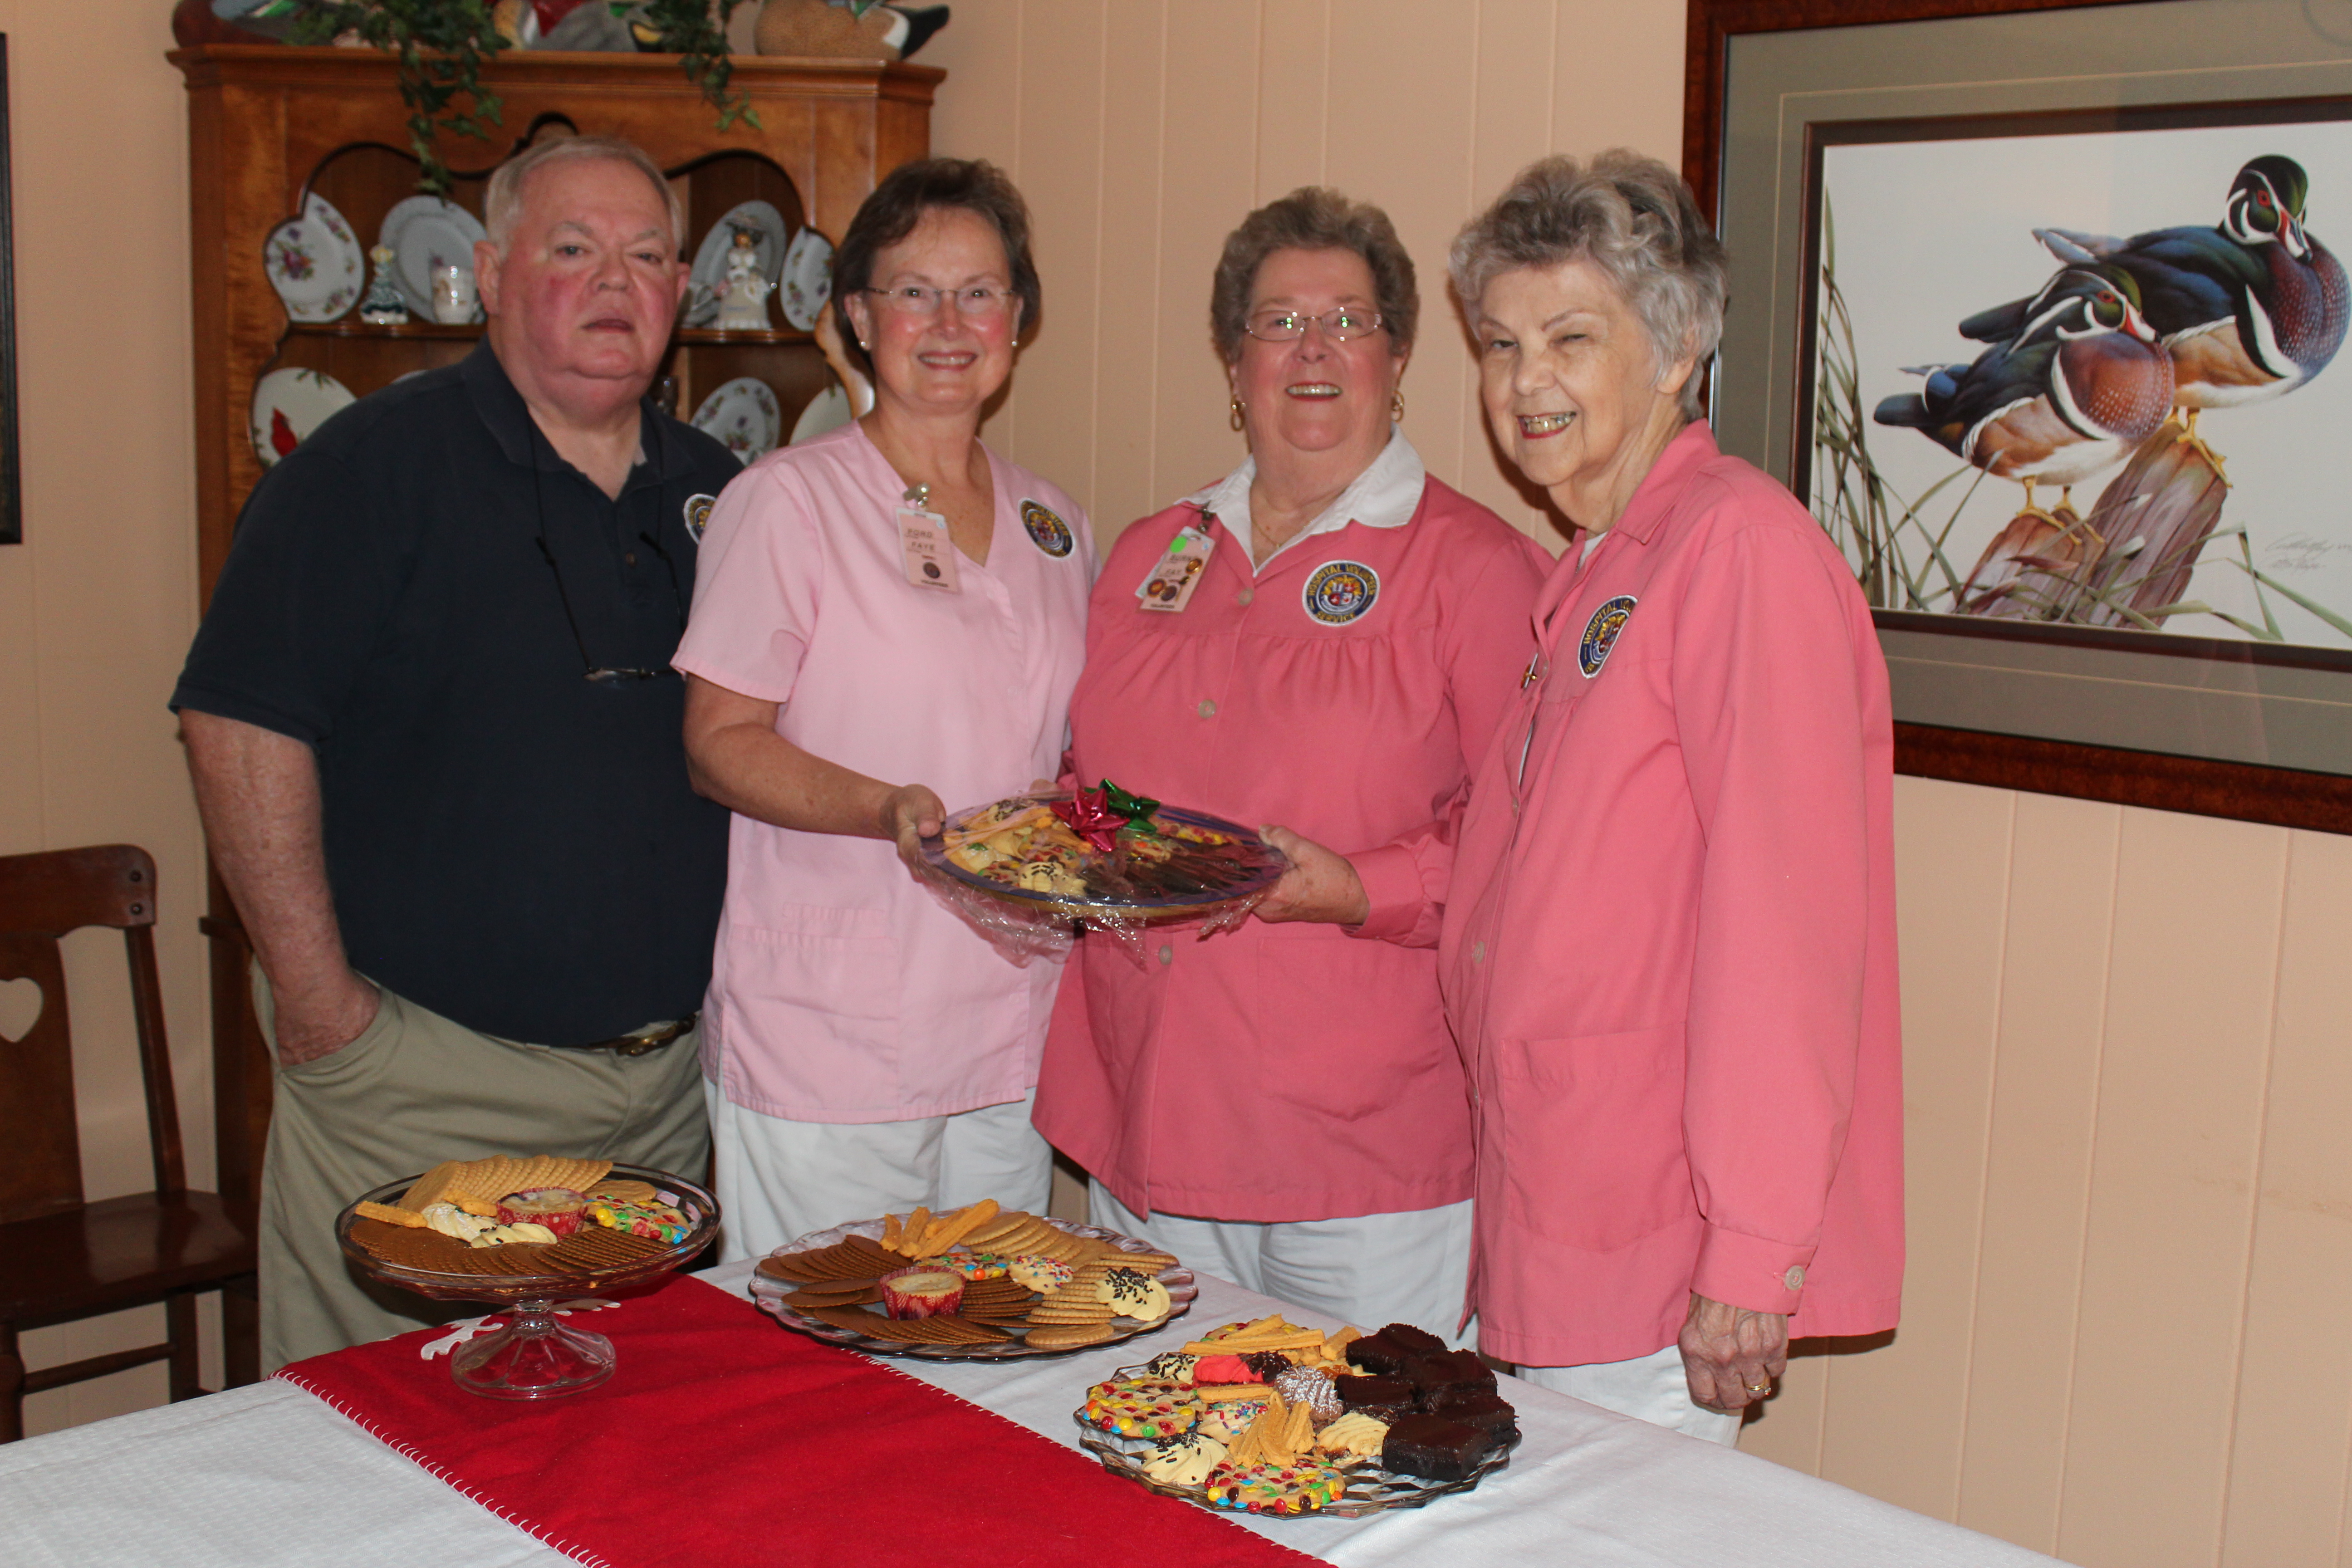 Auxiliary serves Christmas snack trays to EAMC employees